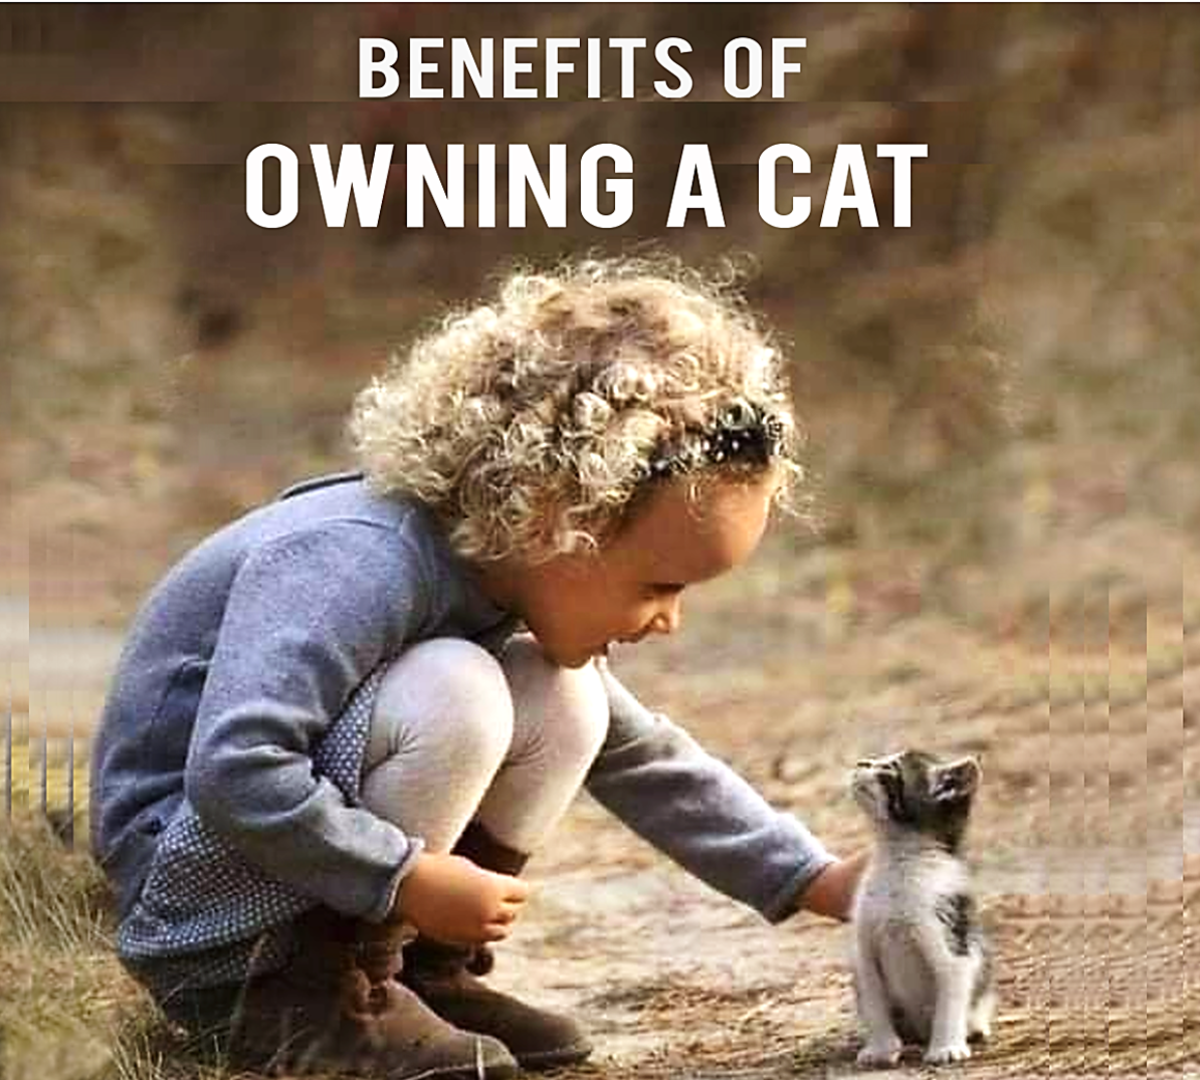 11 Benefits of Owning a Cat